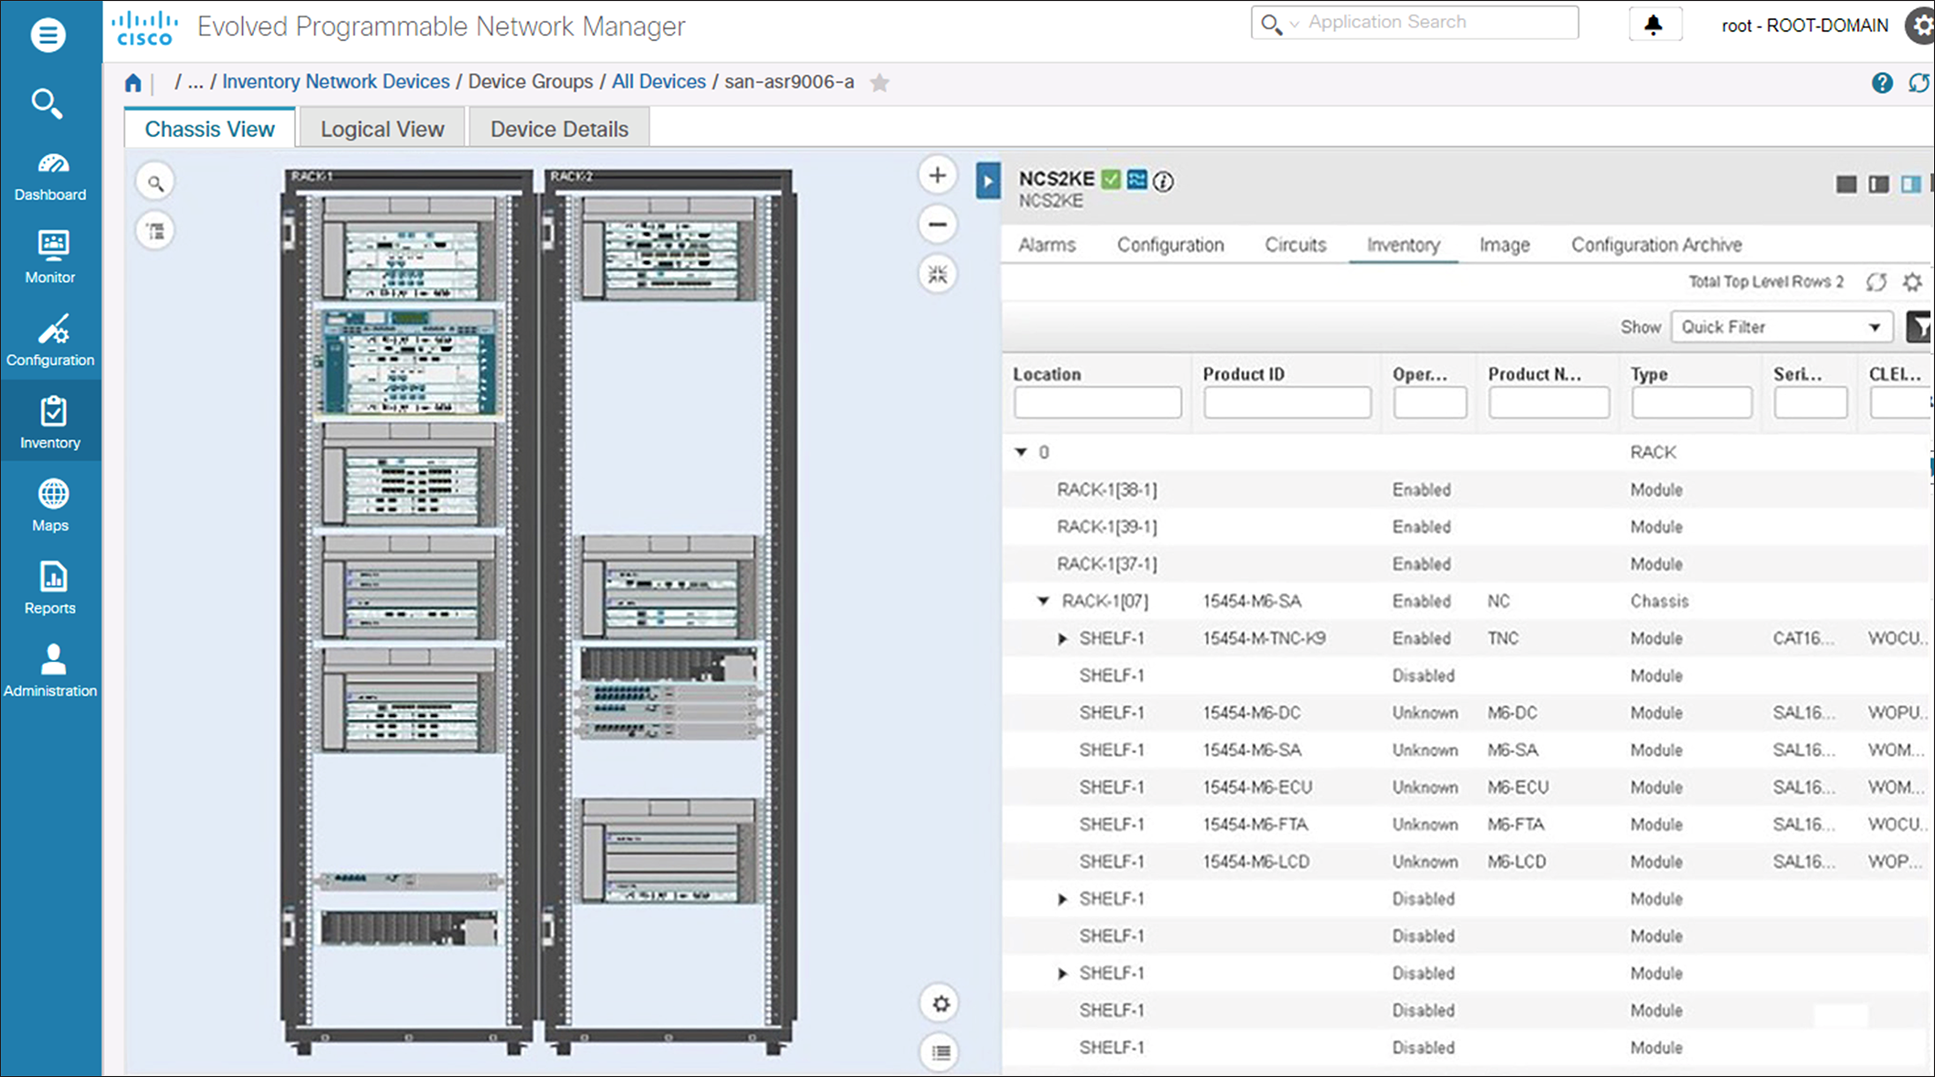 Cisco EPN Manager chassis view for multichassis shelf view (available for the NCS 2000 family of devices)